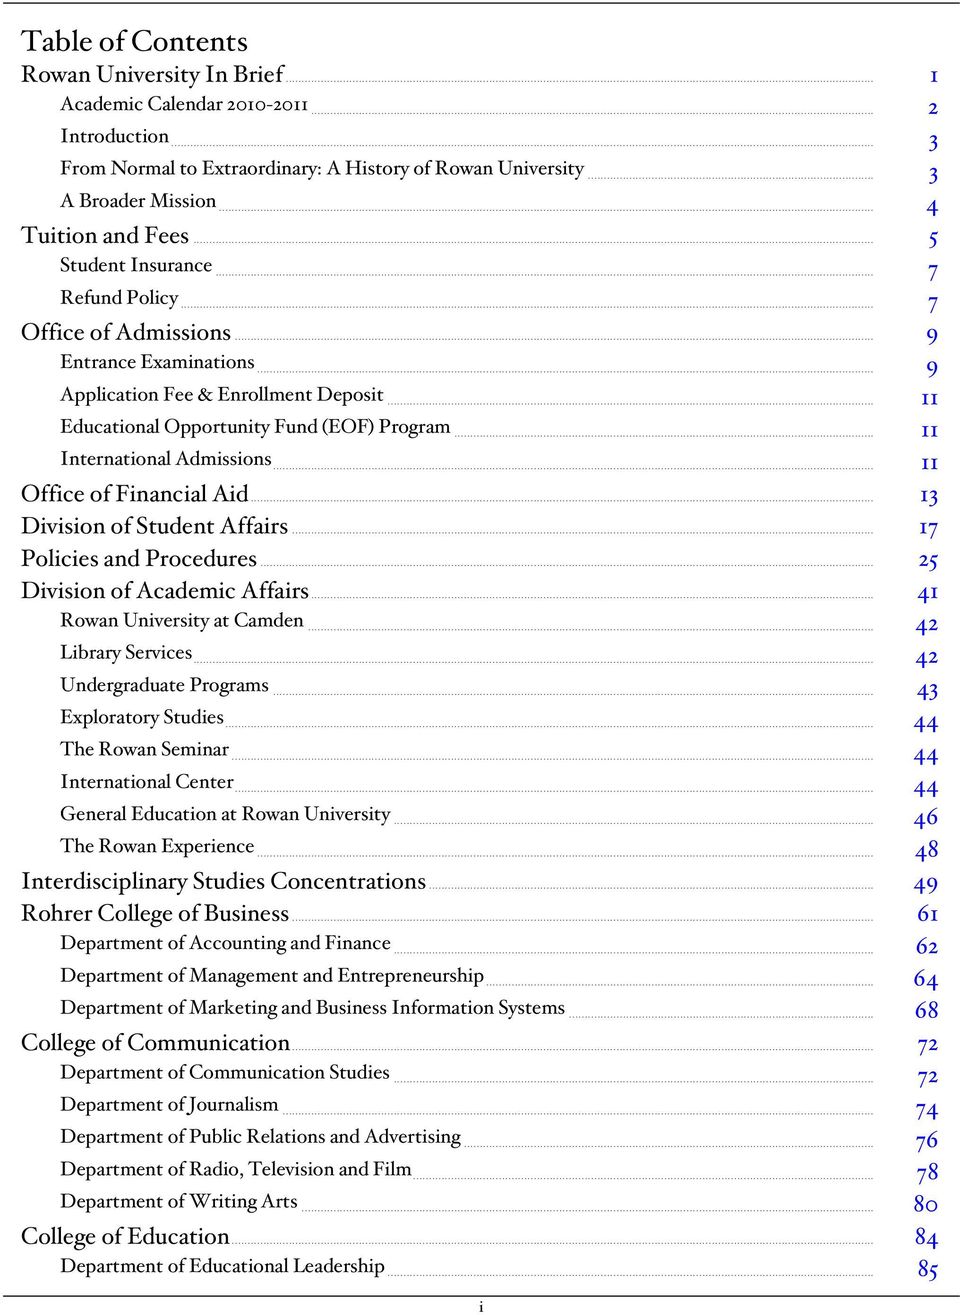 Table Of Contents Rowan University In Brief Pdf Free Download